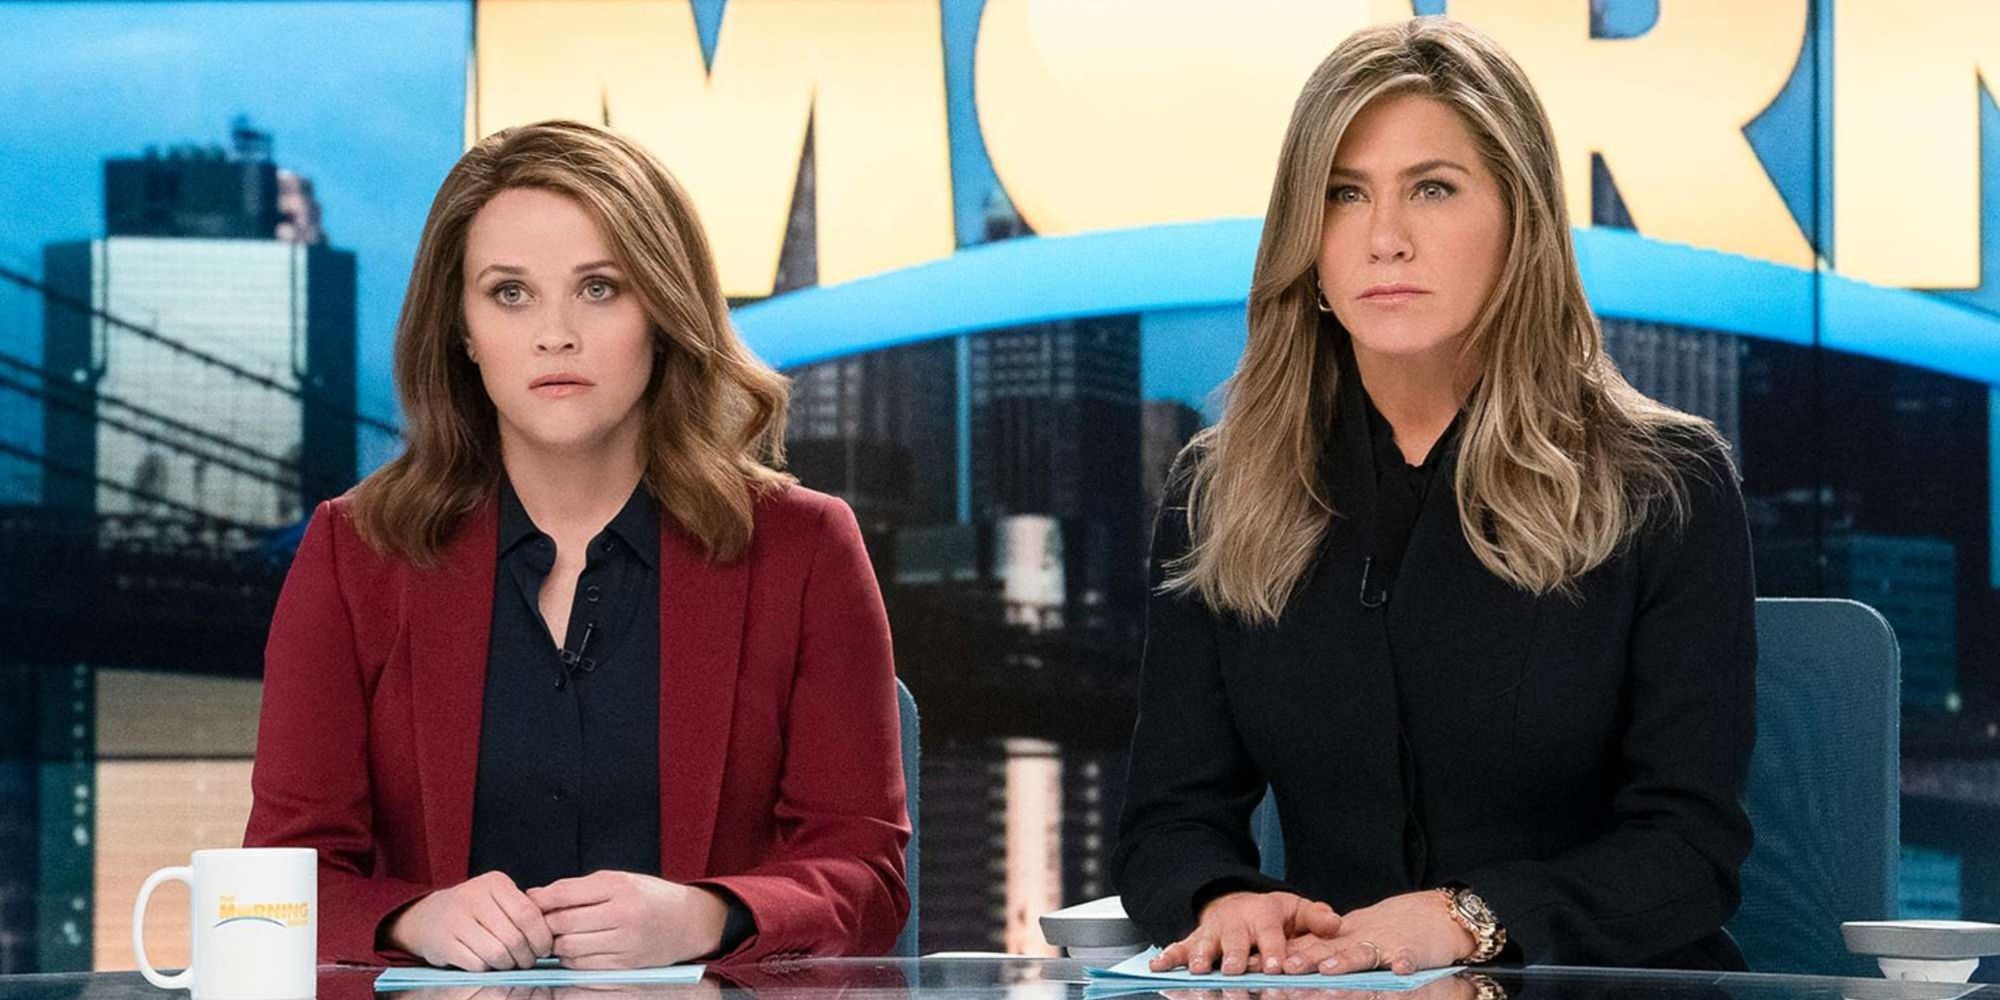 Reese Witherspoon and Jennifer Aniston sitting at their desk looking confused in The Morning Show